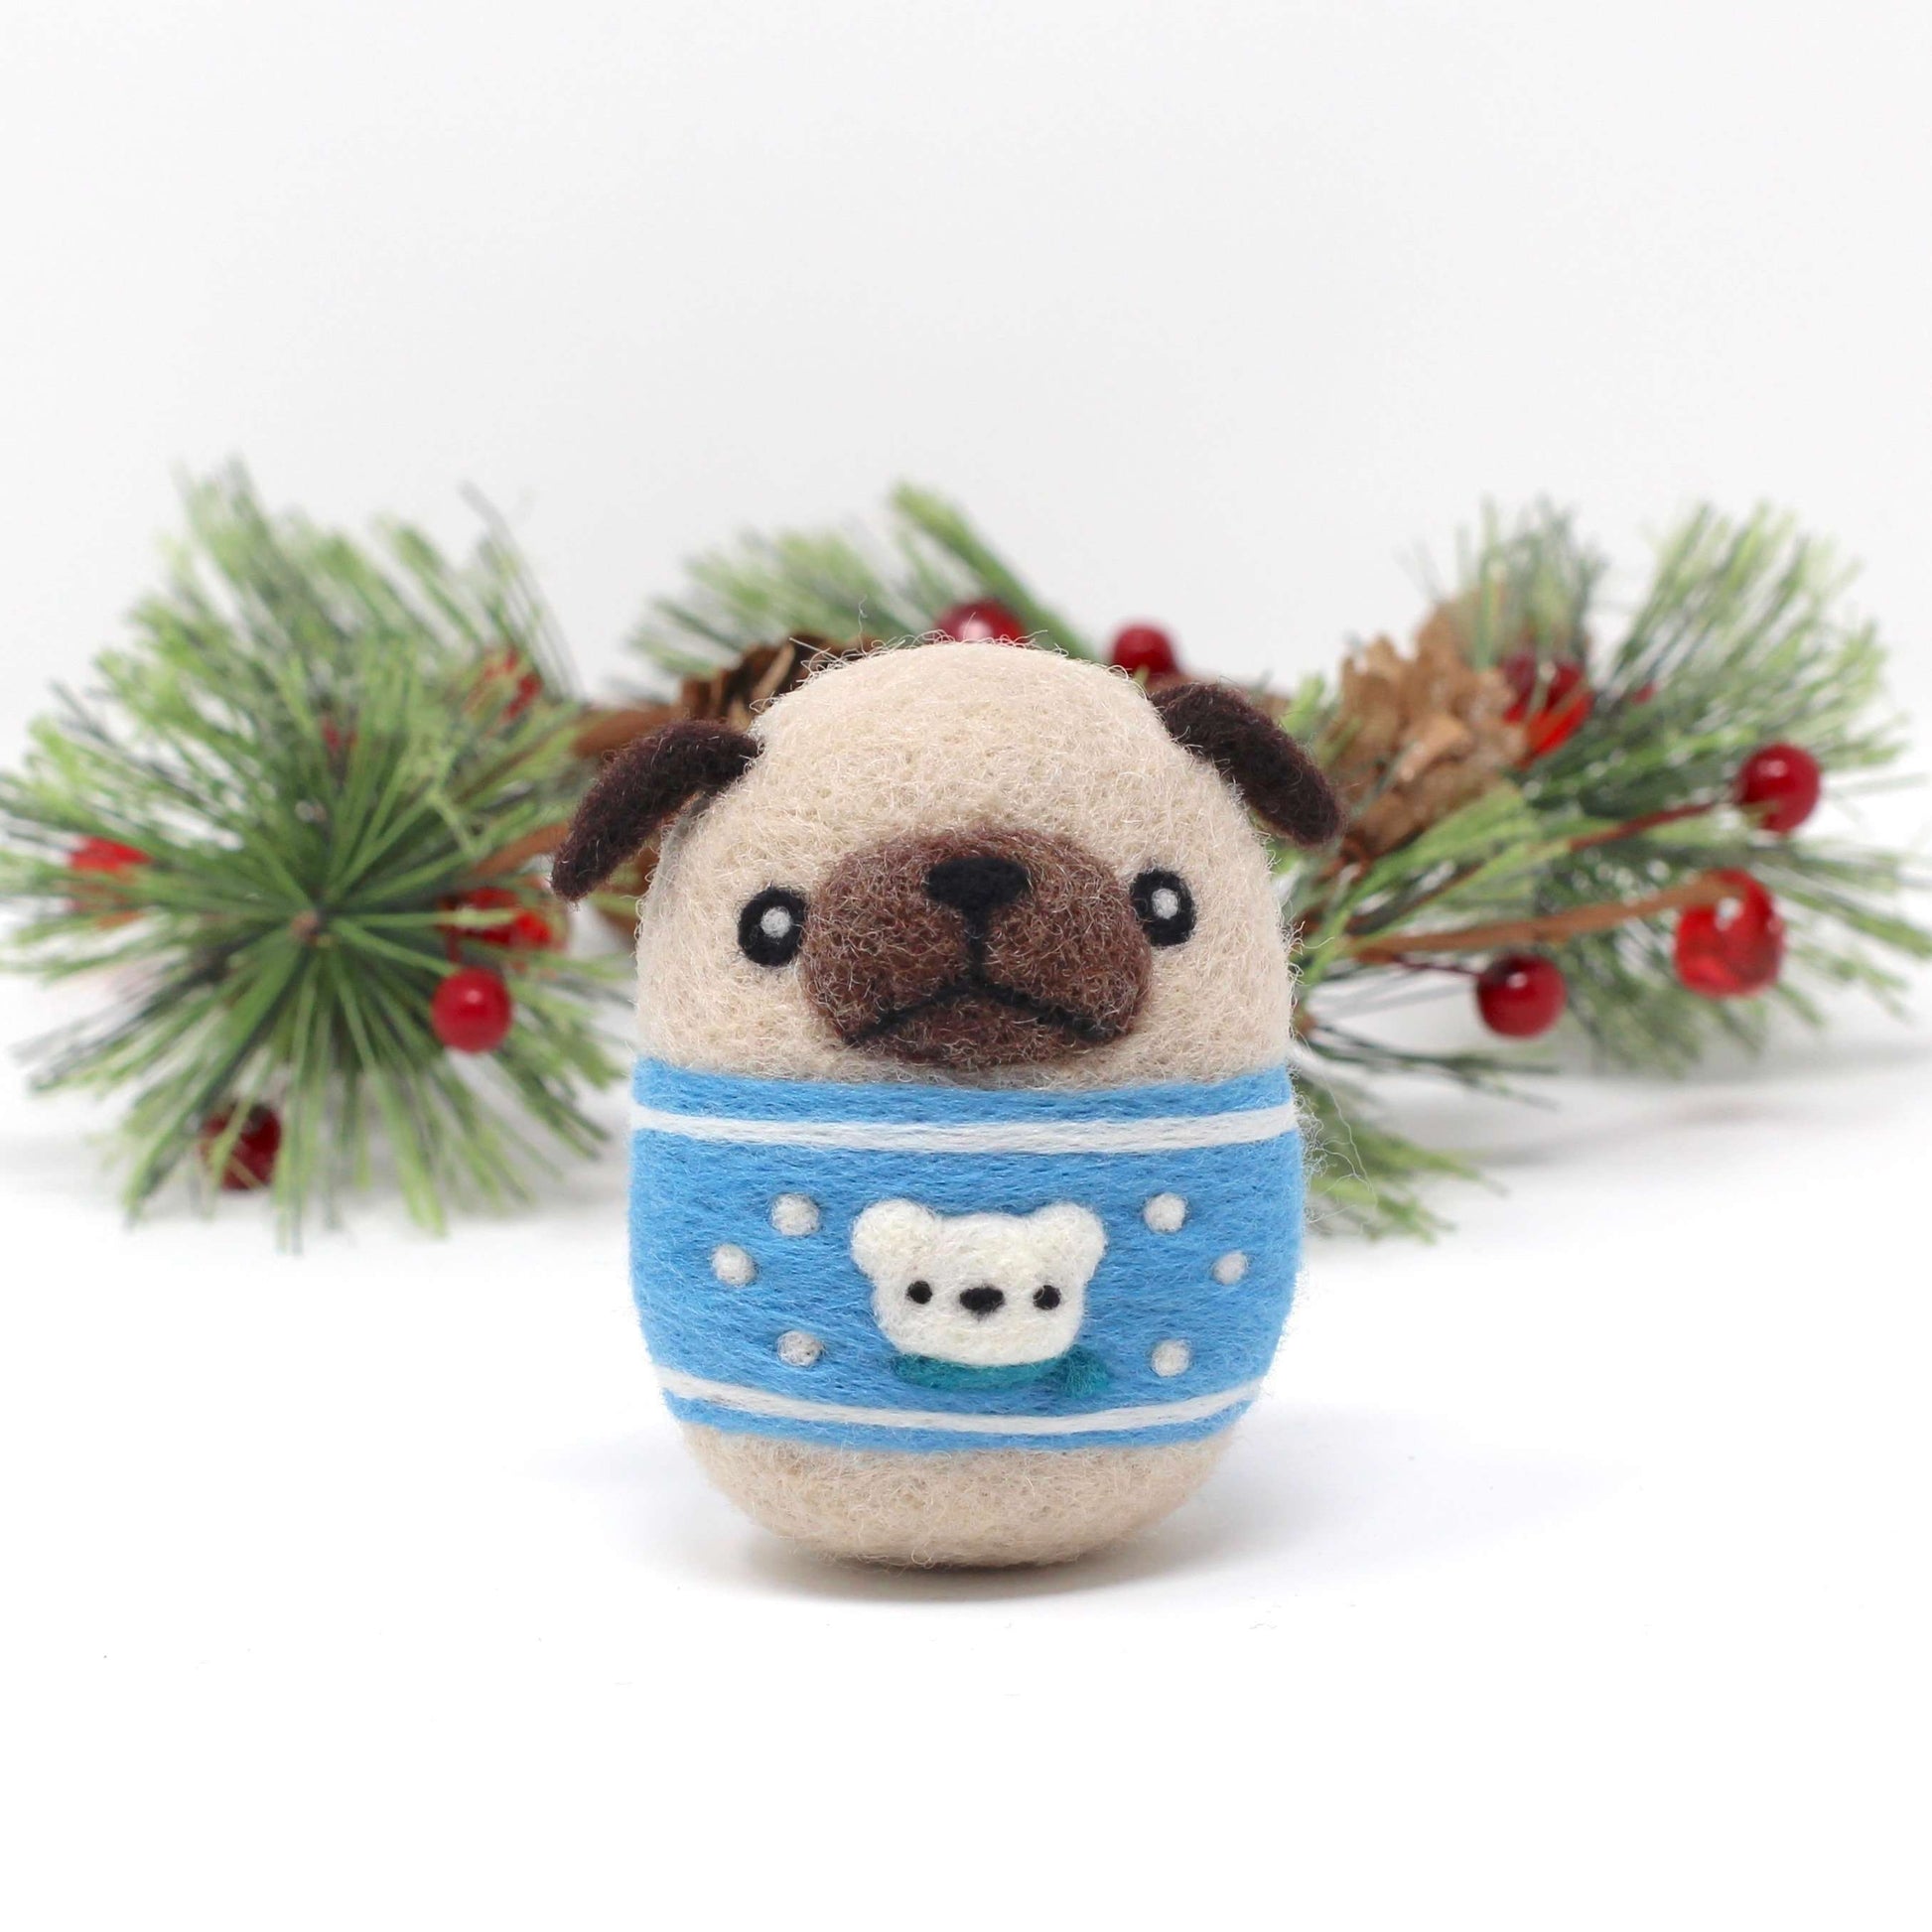 Needle Felted Pug in Blue Polar Bear Christmas Sweater by Wild Whimsy Woolies